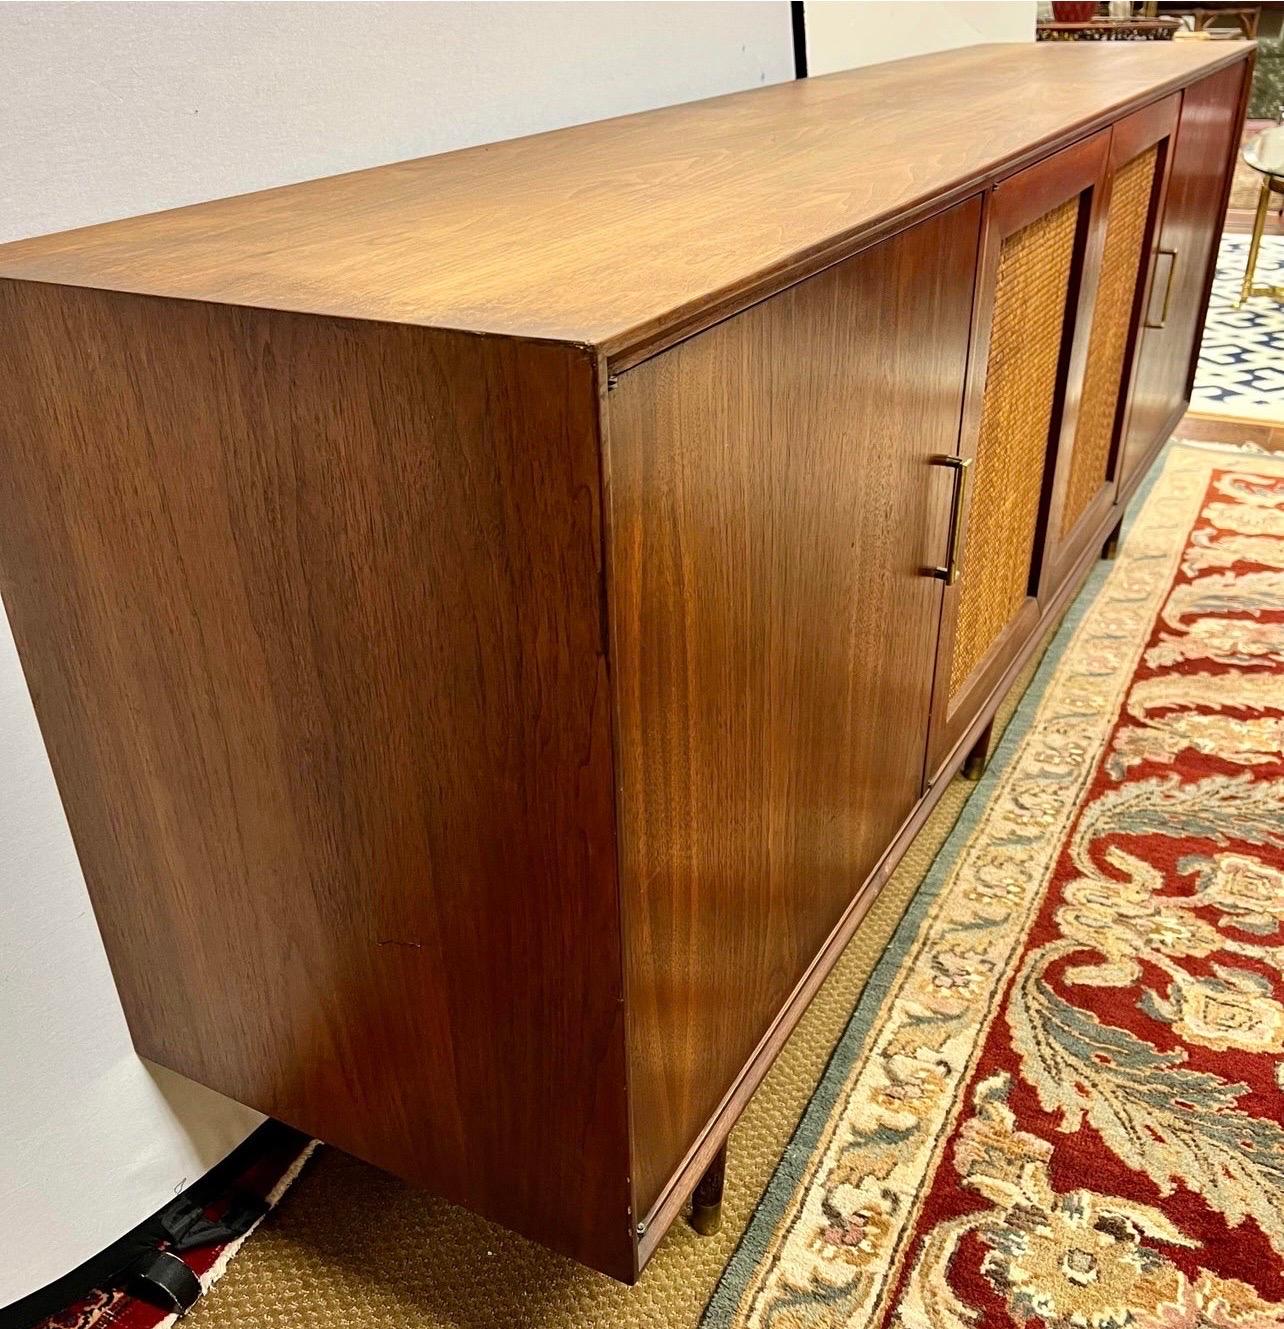 Handsome mid century credenza cabinet that has four doors and feature center doors that have caning. Side doors open to shelving and drawers and there is plenty of storage space. Decorative brass stretcher bar is a nice touch between the front legs.